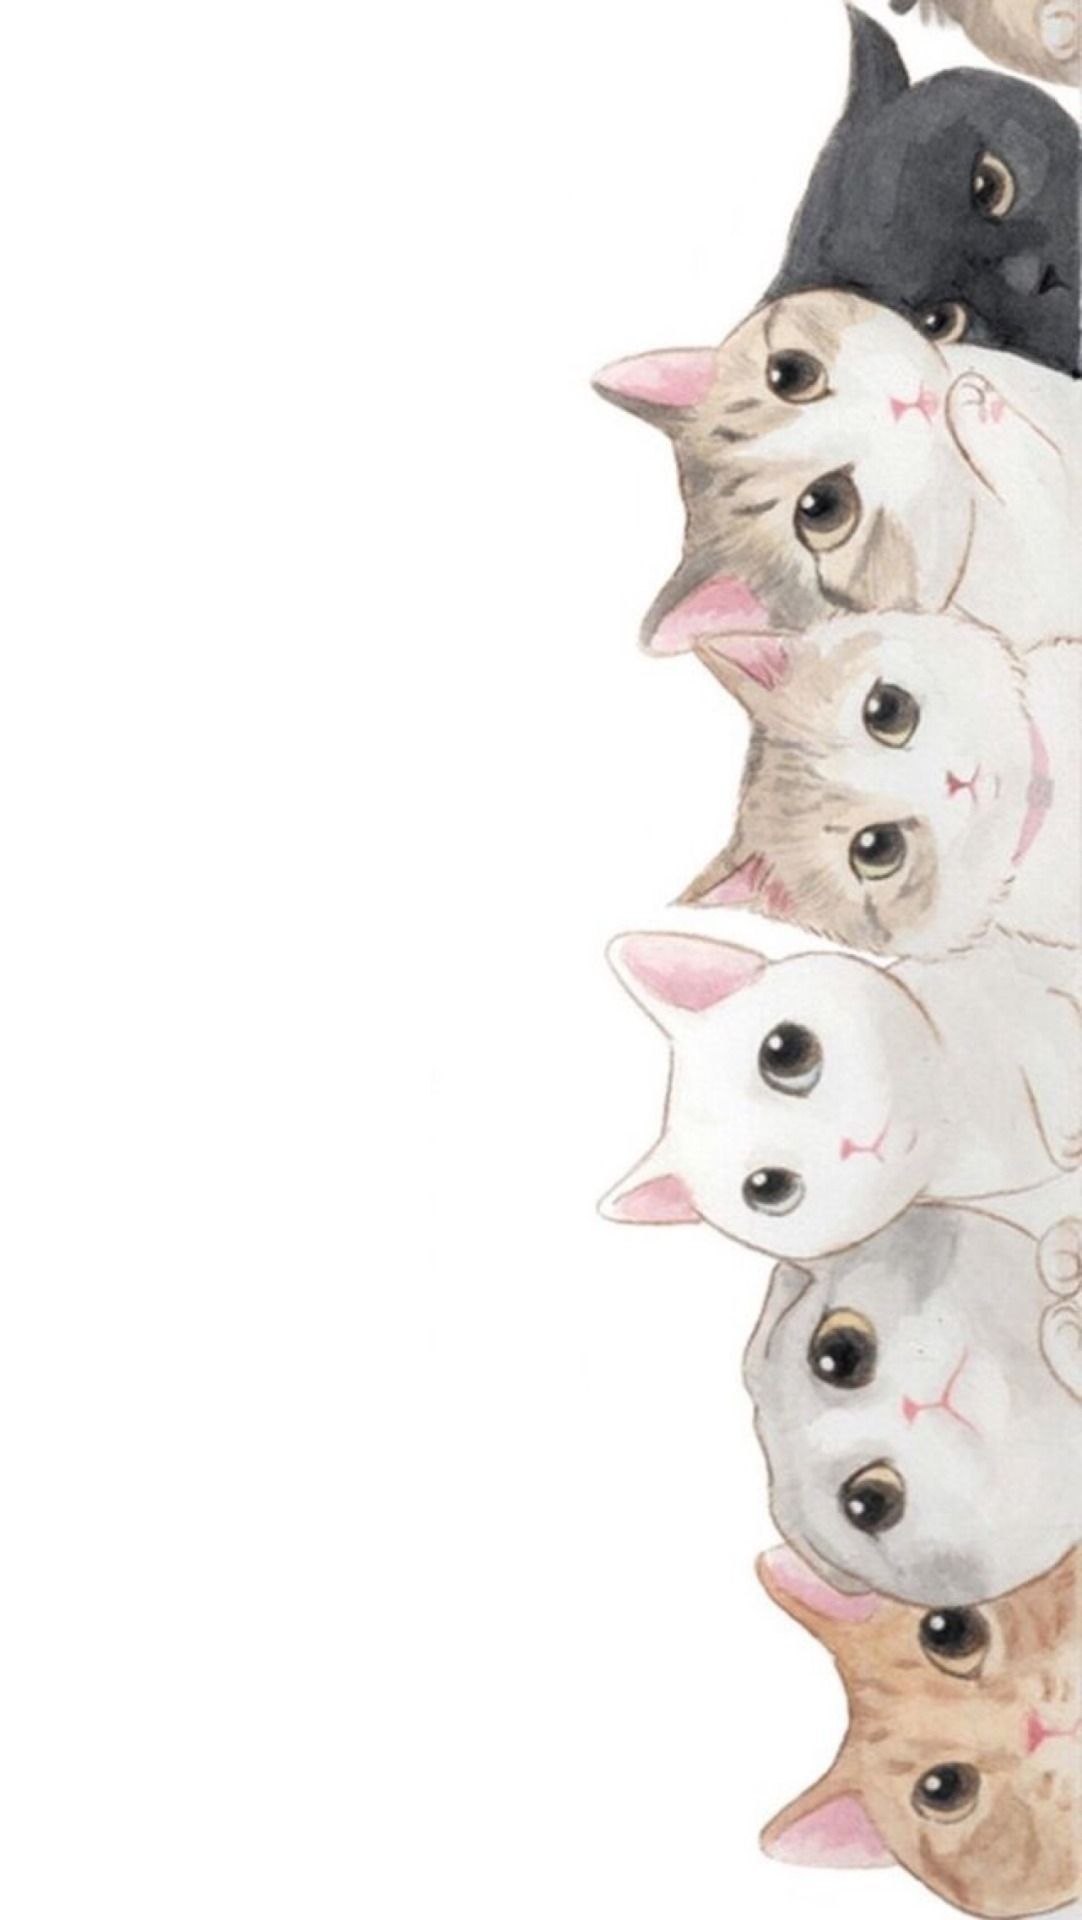 IPhone wallpaper of a row of cats in a line - Cat